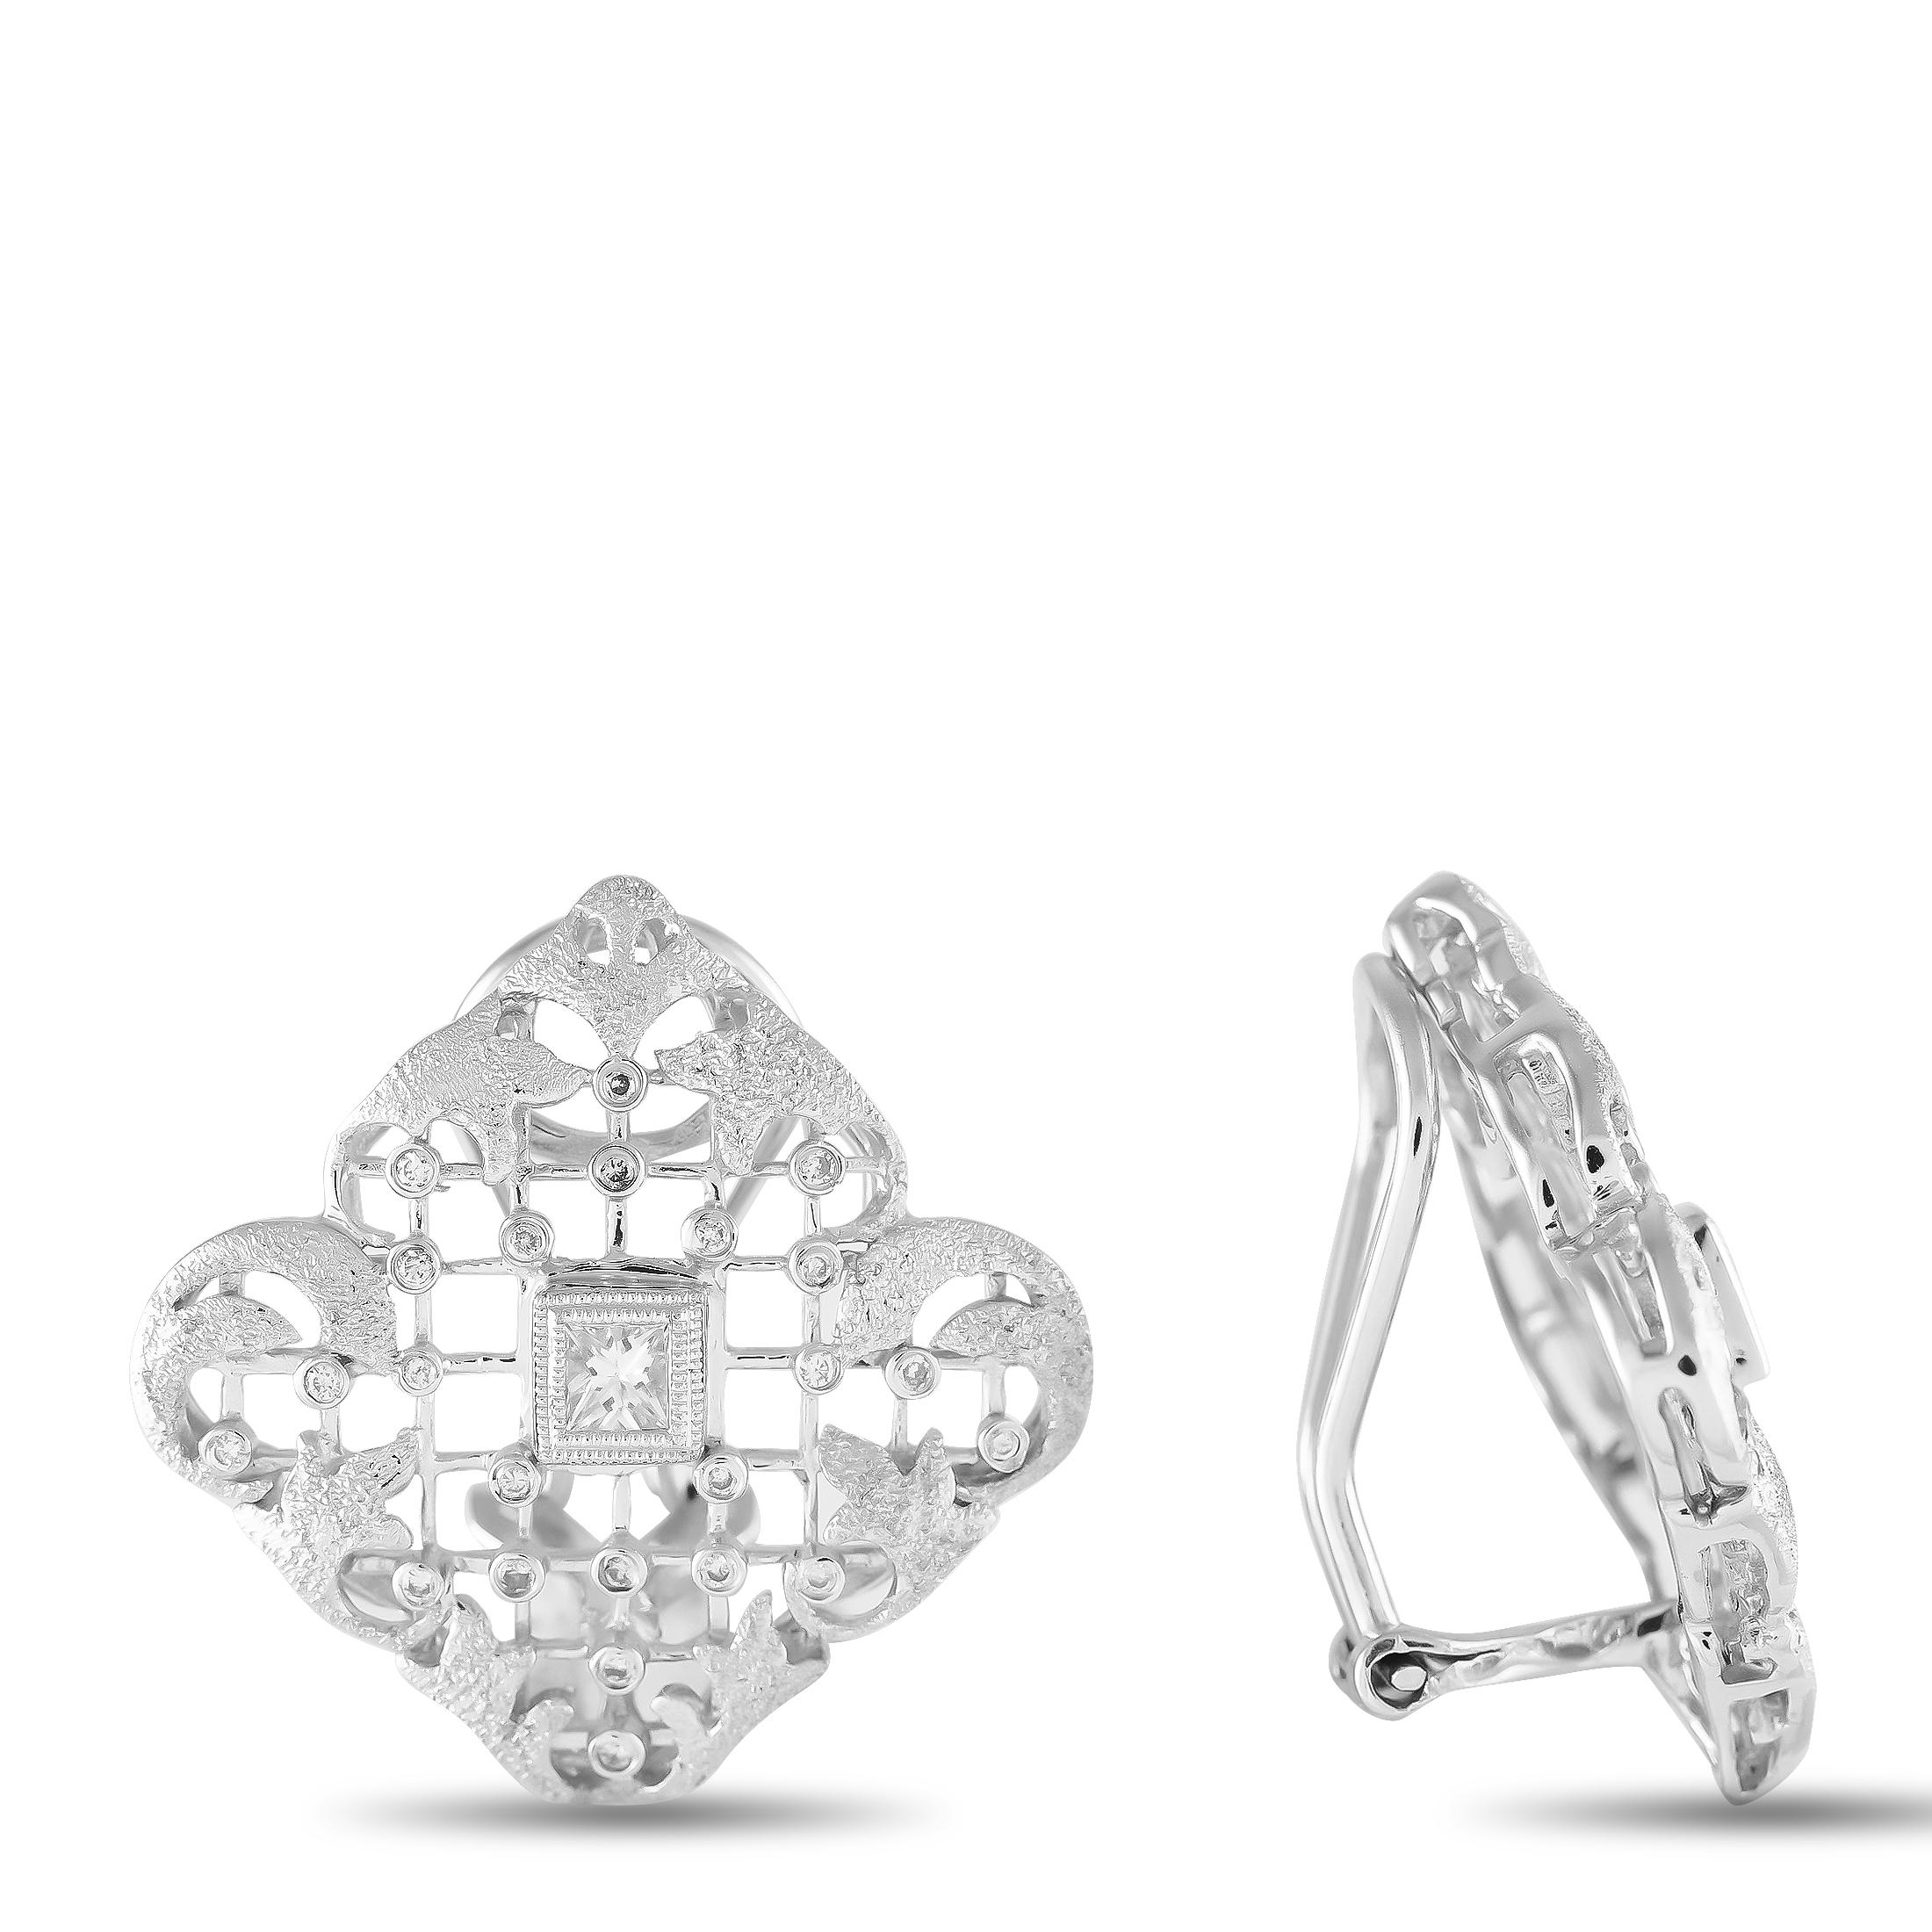 Intricate metalwork and exquisite craftsmanship make these luxury earrings simply unforgettable. Shimmering 18K White Gold elevates the dynamic design, while Diamonds with a total weight of 0.45 carats allows them to effortlessly sparkle and shine.